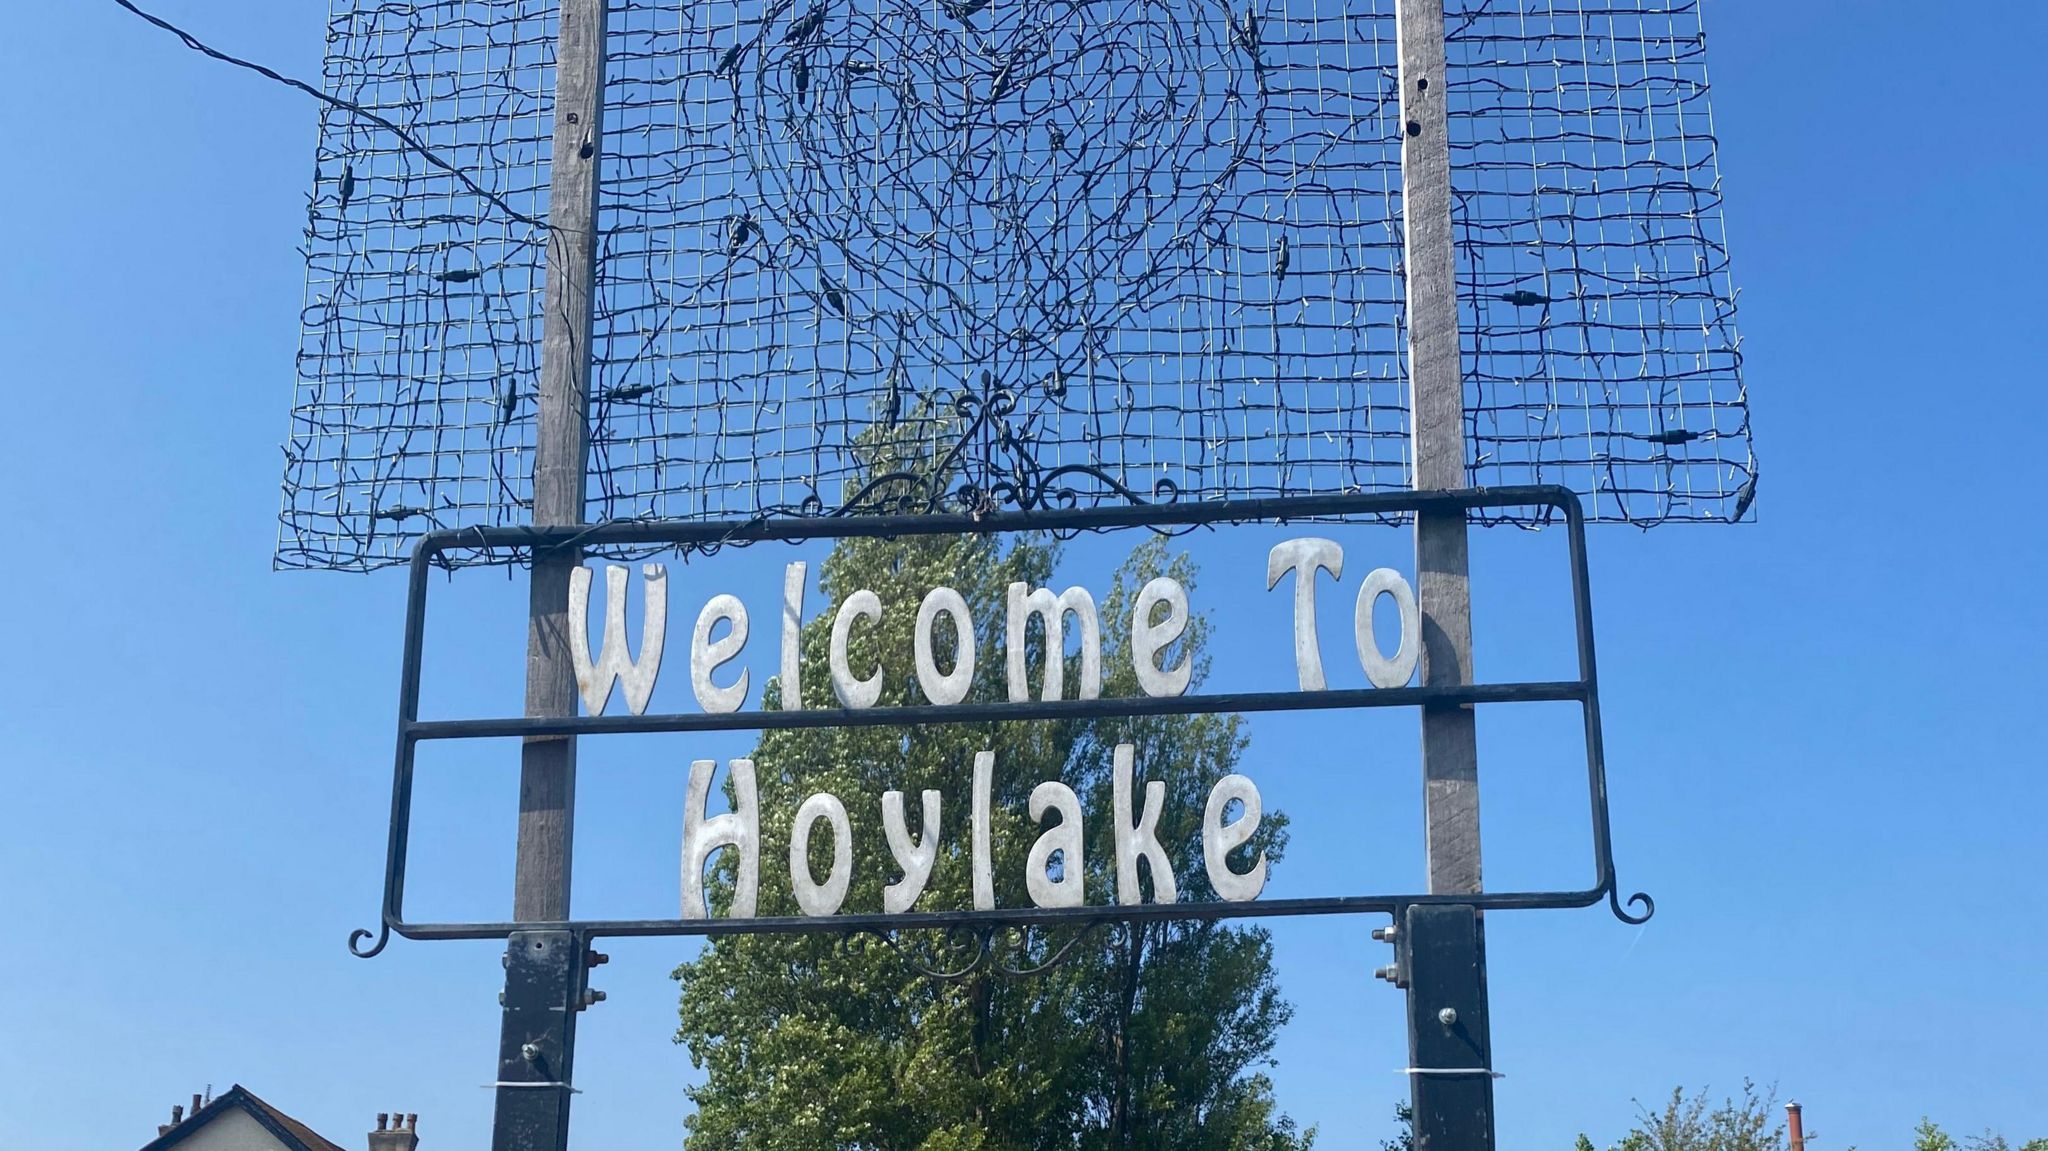 A white-lettered sign reading 'Welcome to Hoylake' hangs between two grey posts, underneath an unlit heart-shaped light installation and in front of a green-leafed tree and a cloudless blue sky